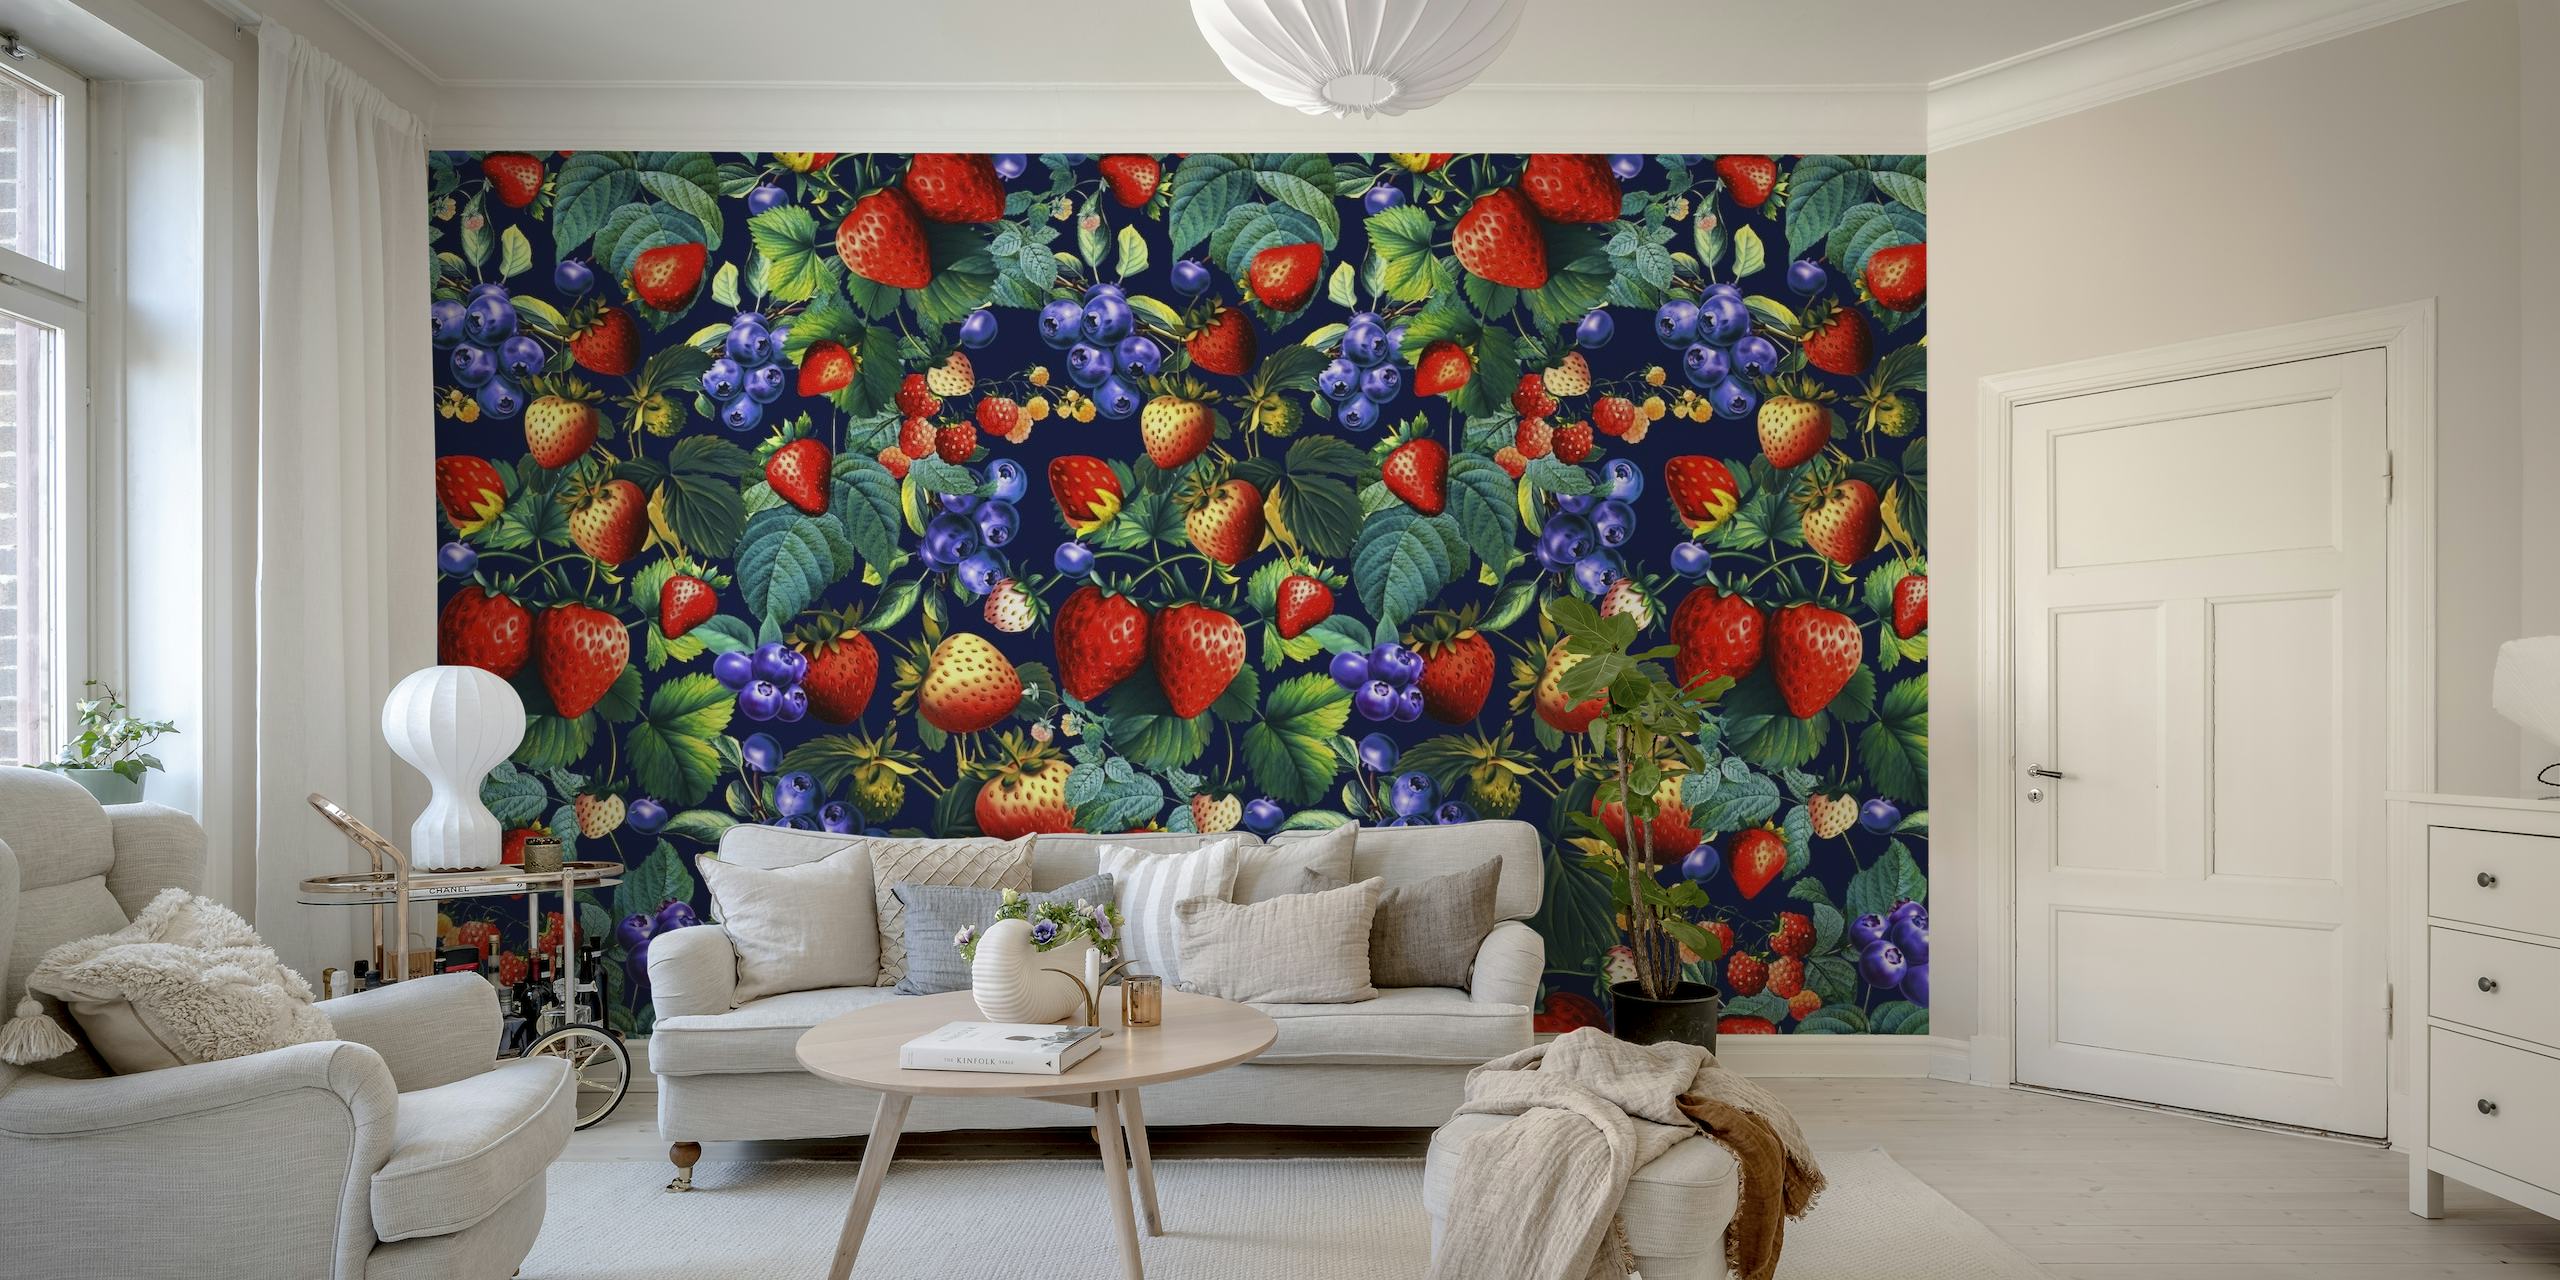 Colorful wall mural with strawberries and flowers pattern